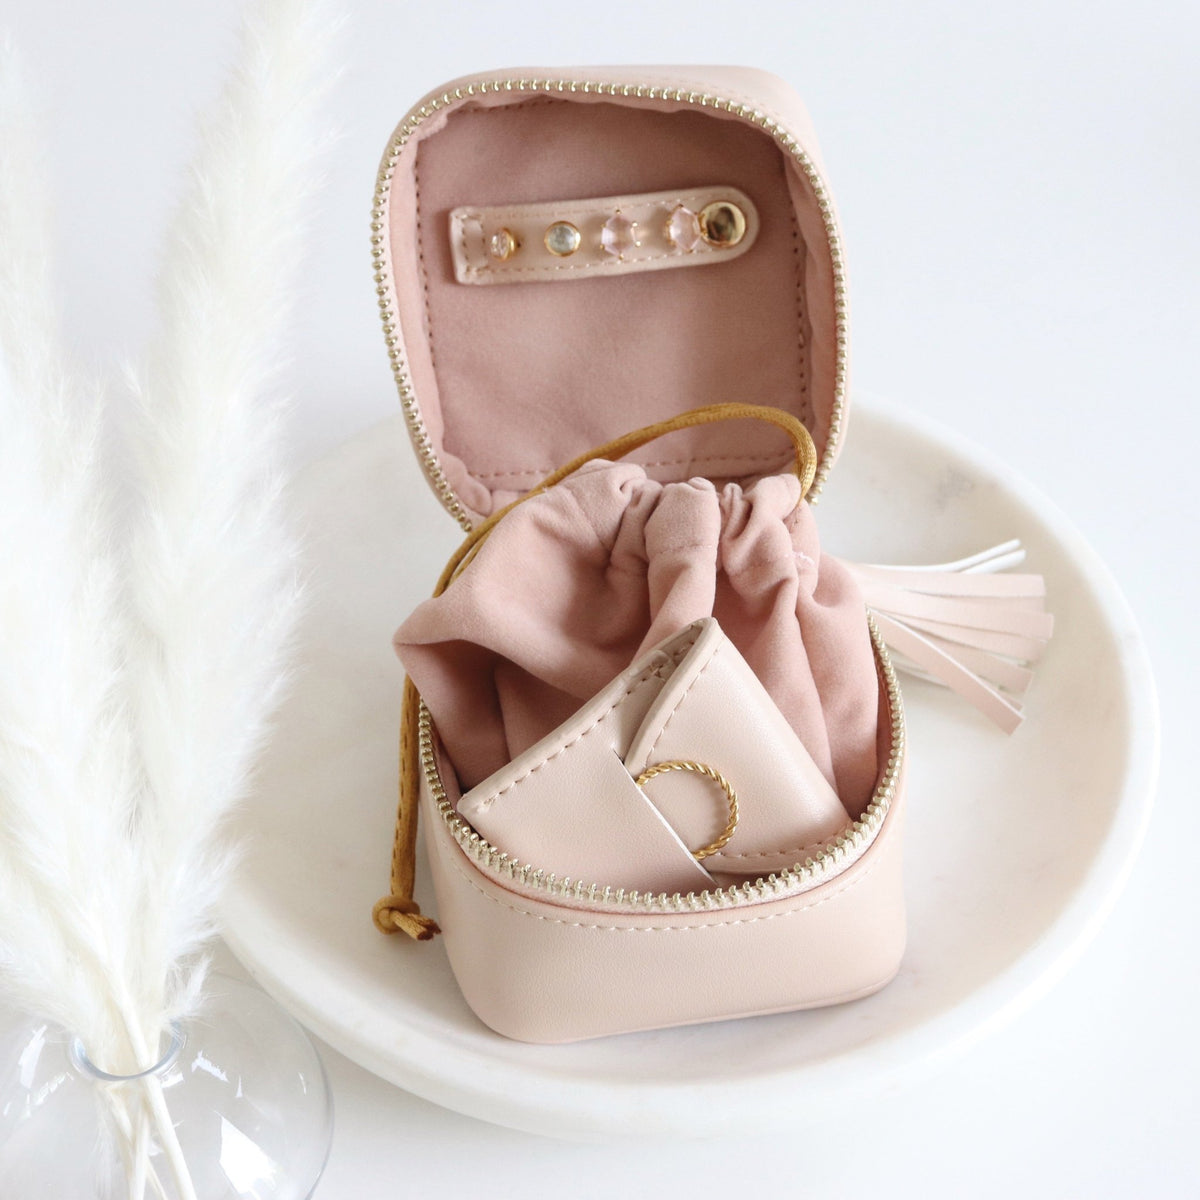 Wanderlust Daily Jewelry Bag - Blush Pink - SO PRETTY CARA COTTER